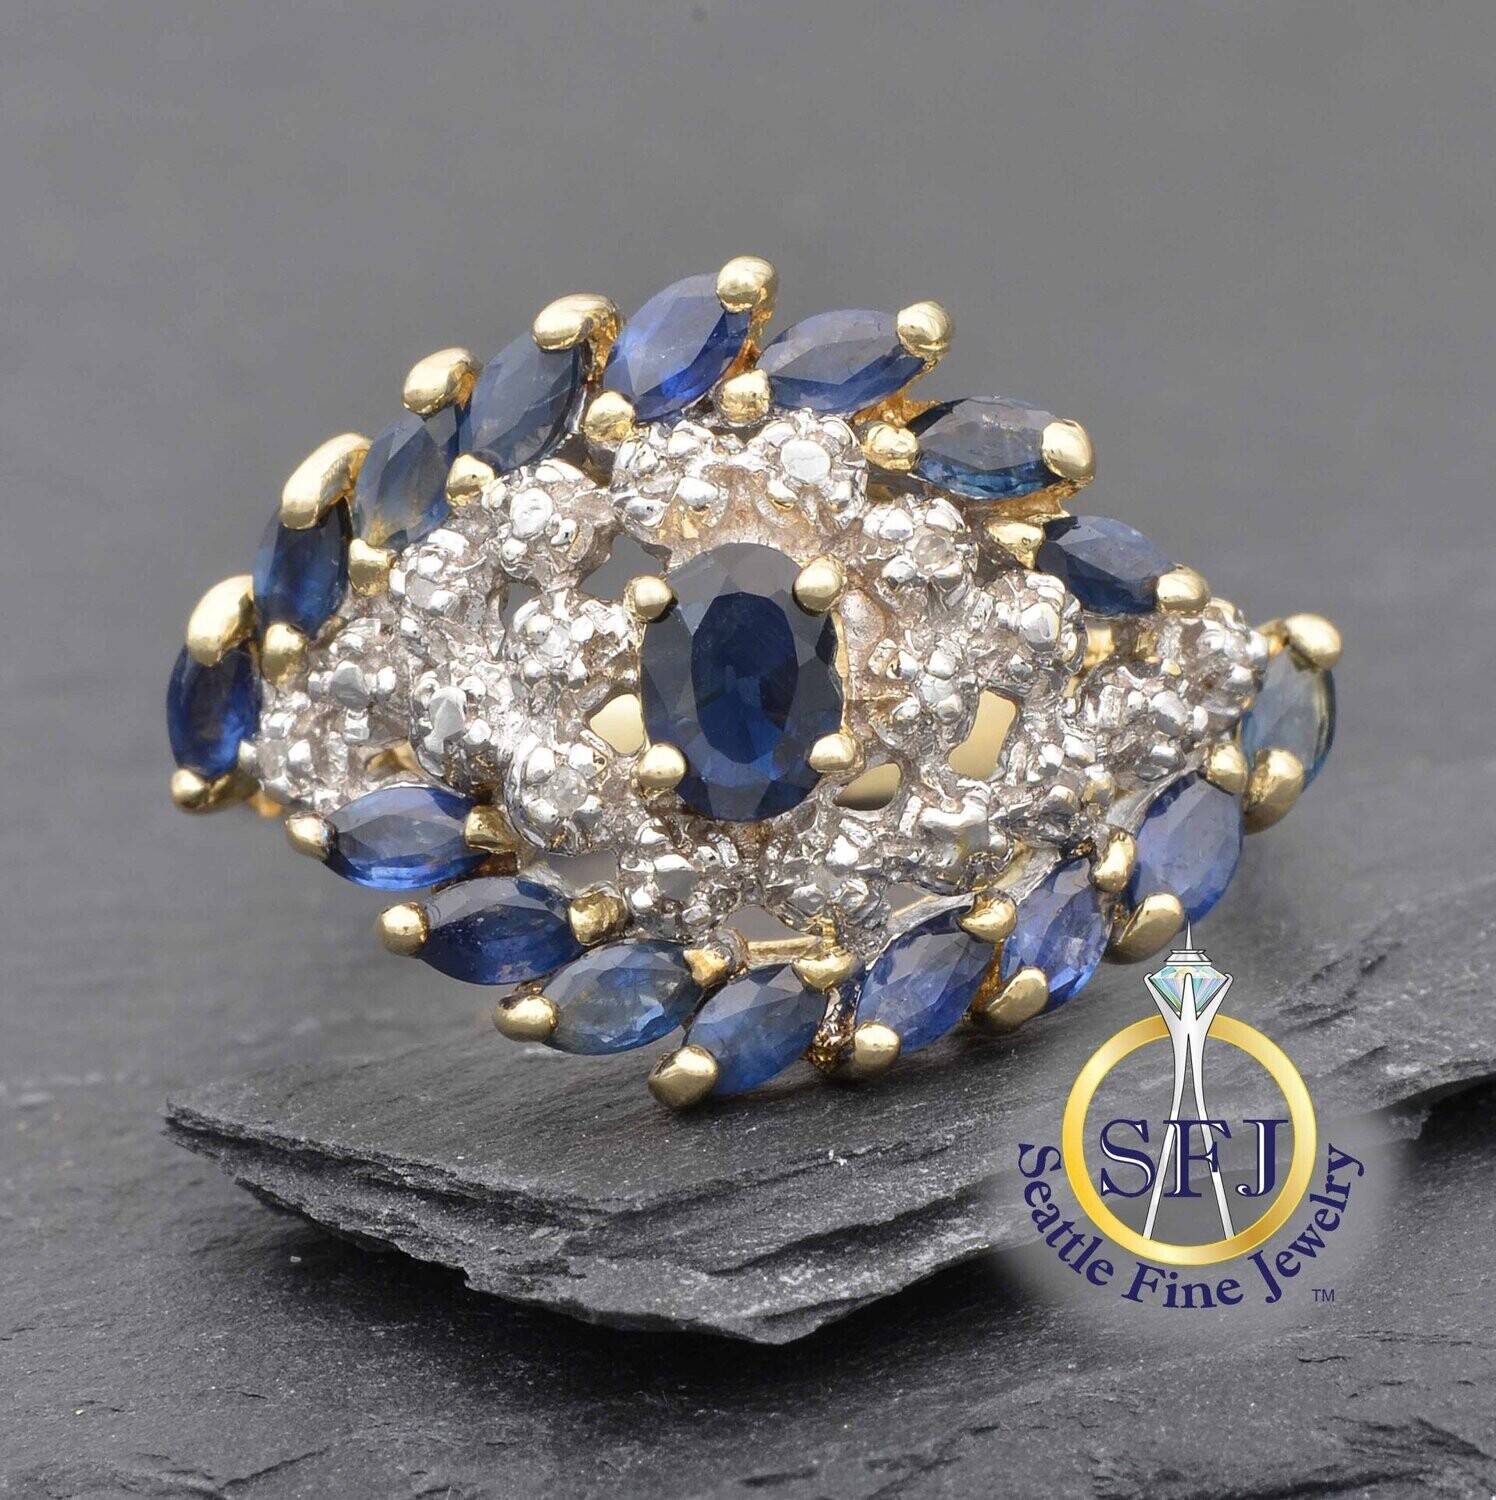 Sapphire and Diamond "Eye of Horus" Cluster Ring, Solid 14K Yellow Gold